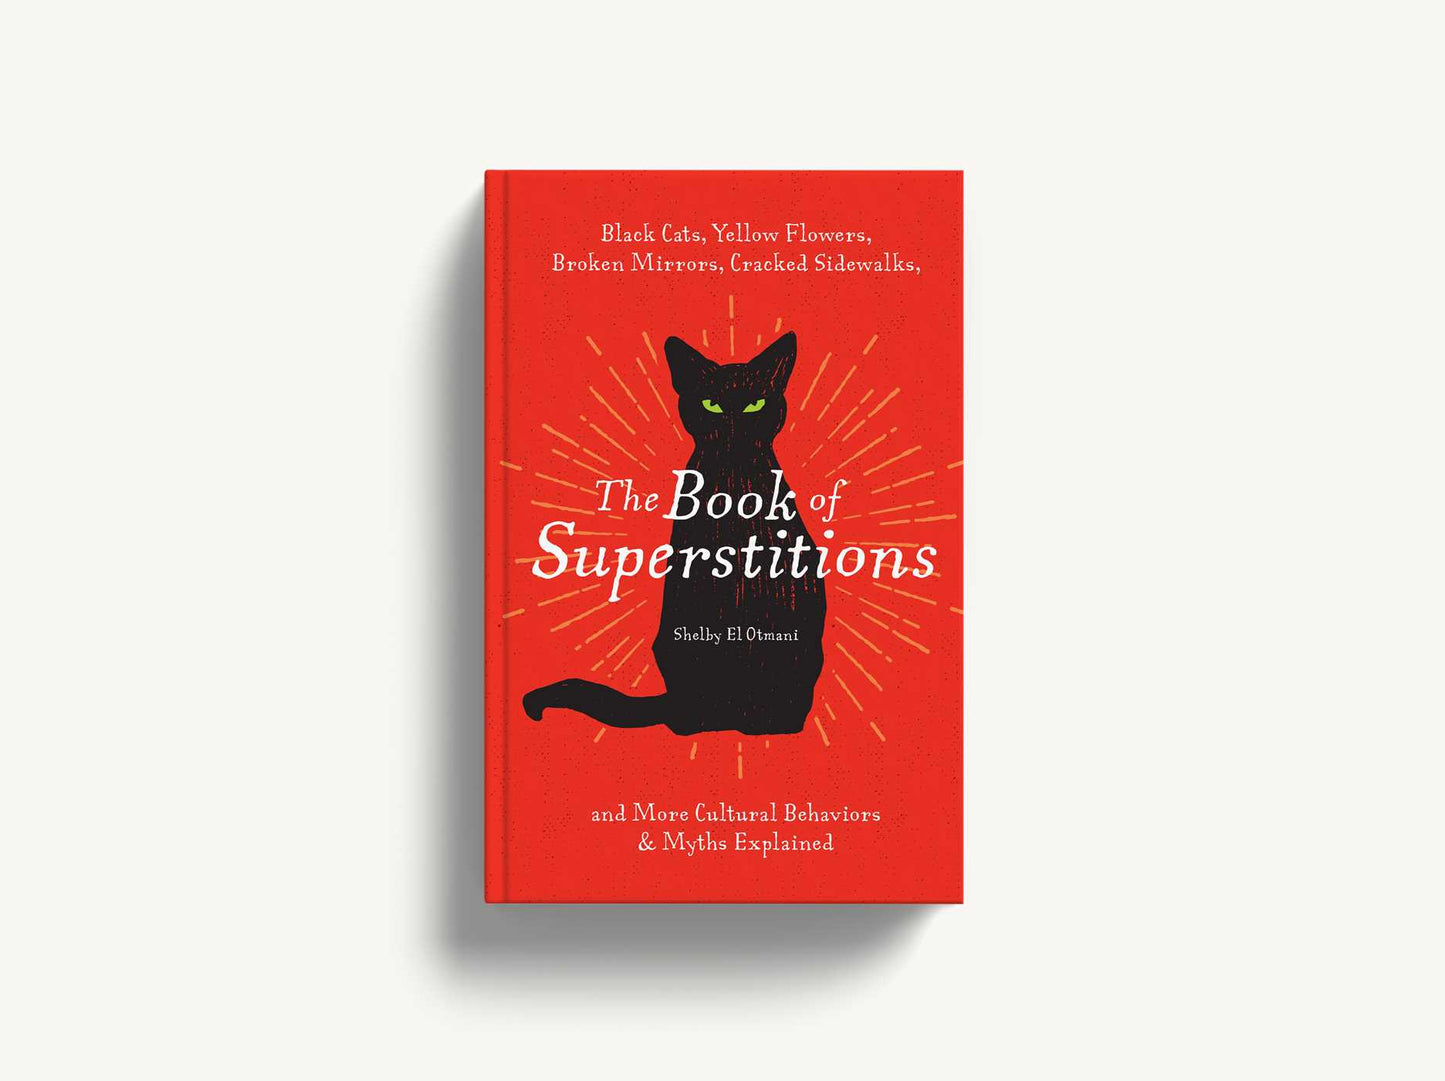 The Book of Superstitions: Black Cats, Yellow Flowers, Broken Mirrors, Cracked Sidewalks, and More Cultural Behaviors & Myths Explained